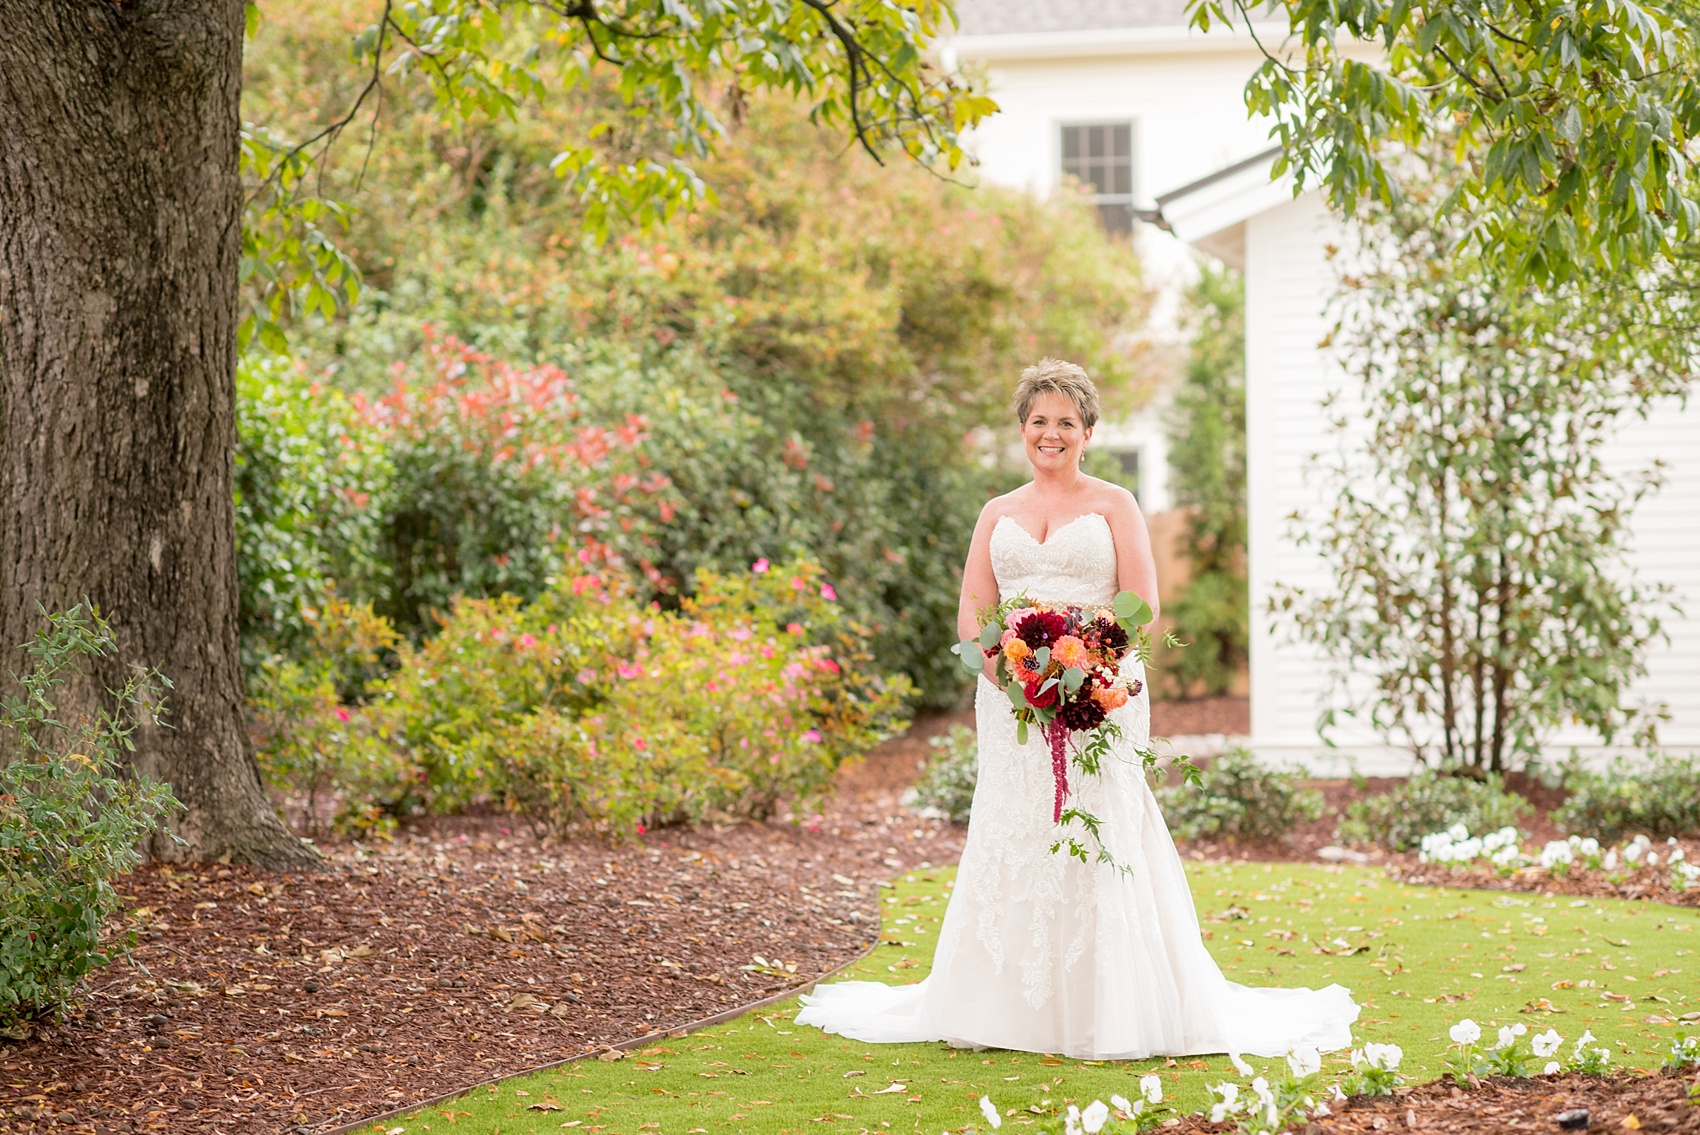 Mikkel Paige Photography photos from a Merrimon-Wynne House wedding in Raleigh. The bride wore a strapless gown and carried a fall whimsical bouquet by Meristem Floral. 